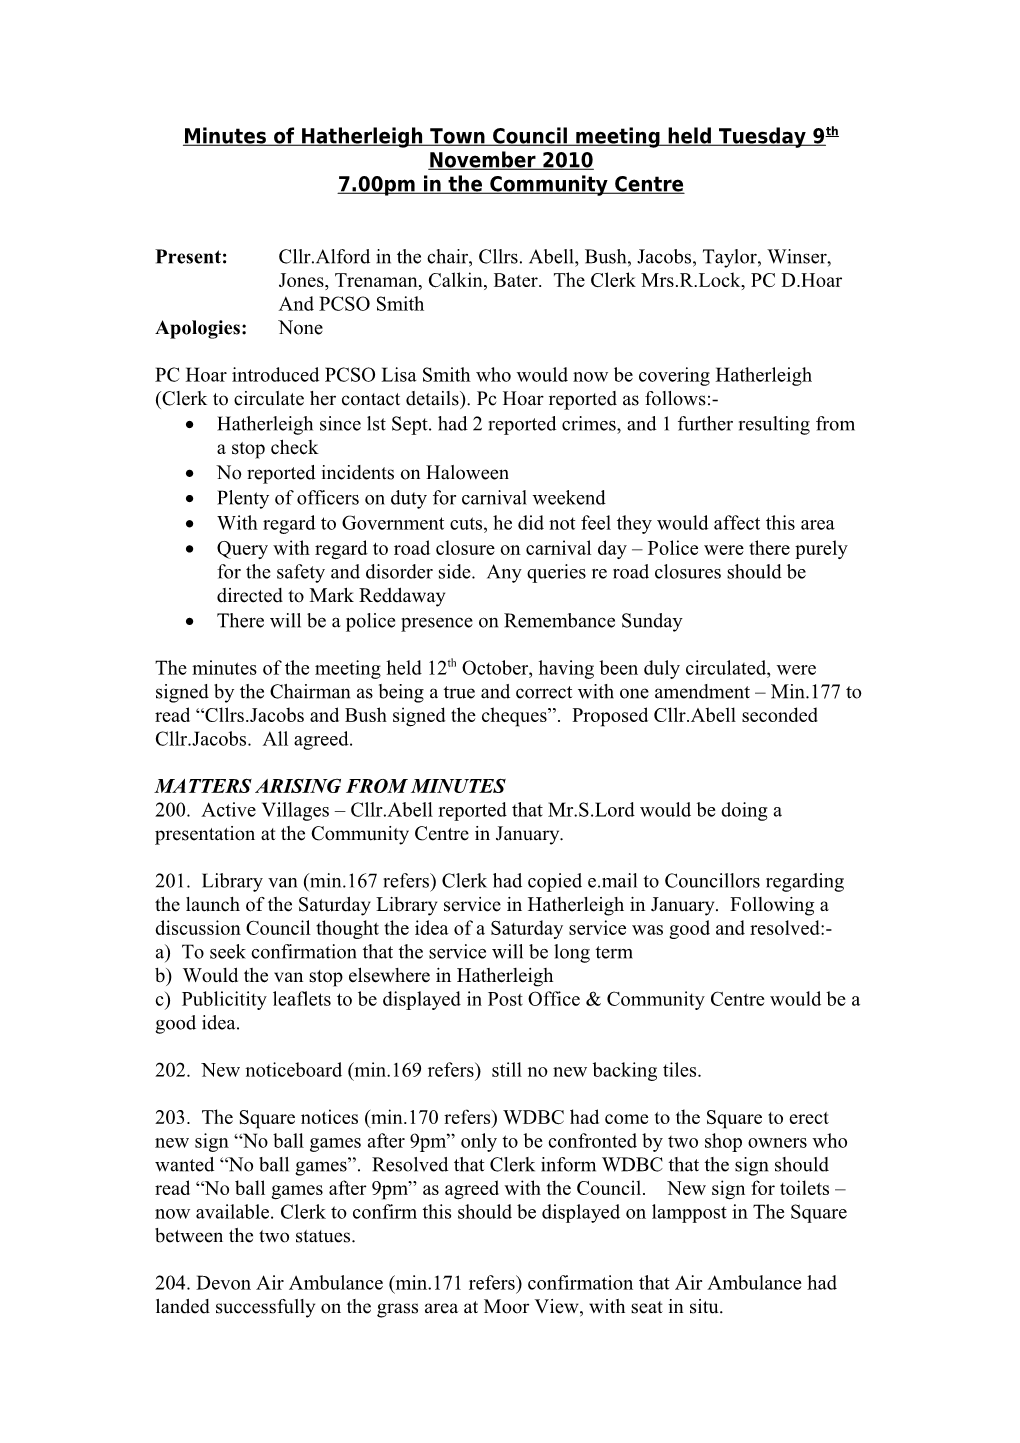 Minutes of Hatherleigh Town Council Meeting Held Tuesday 9Th November 2010-11-10